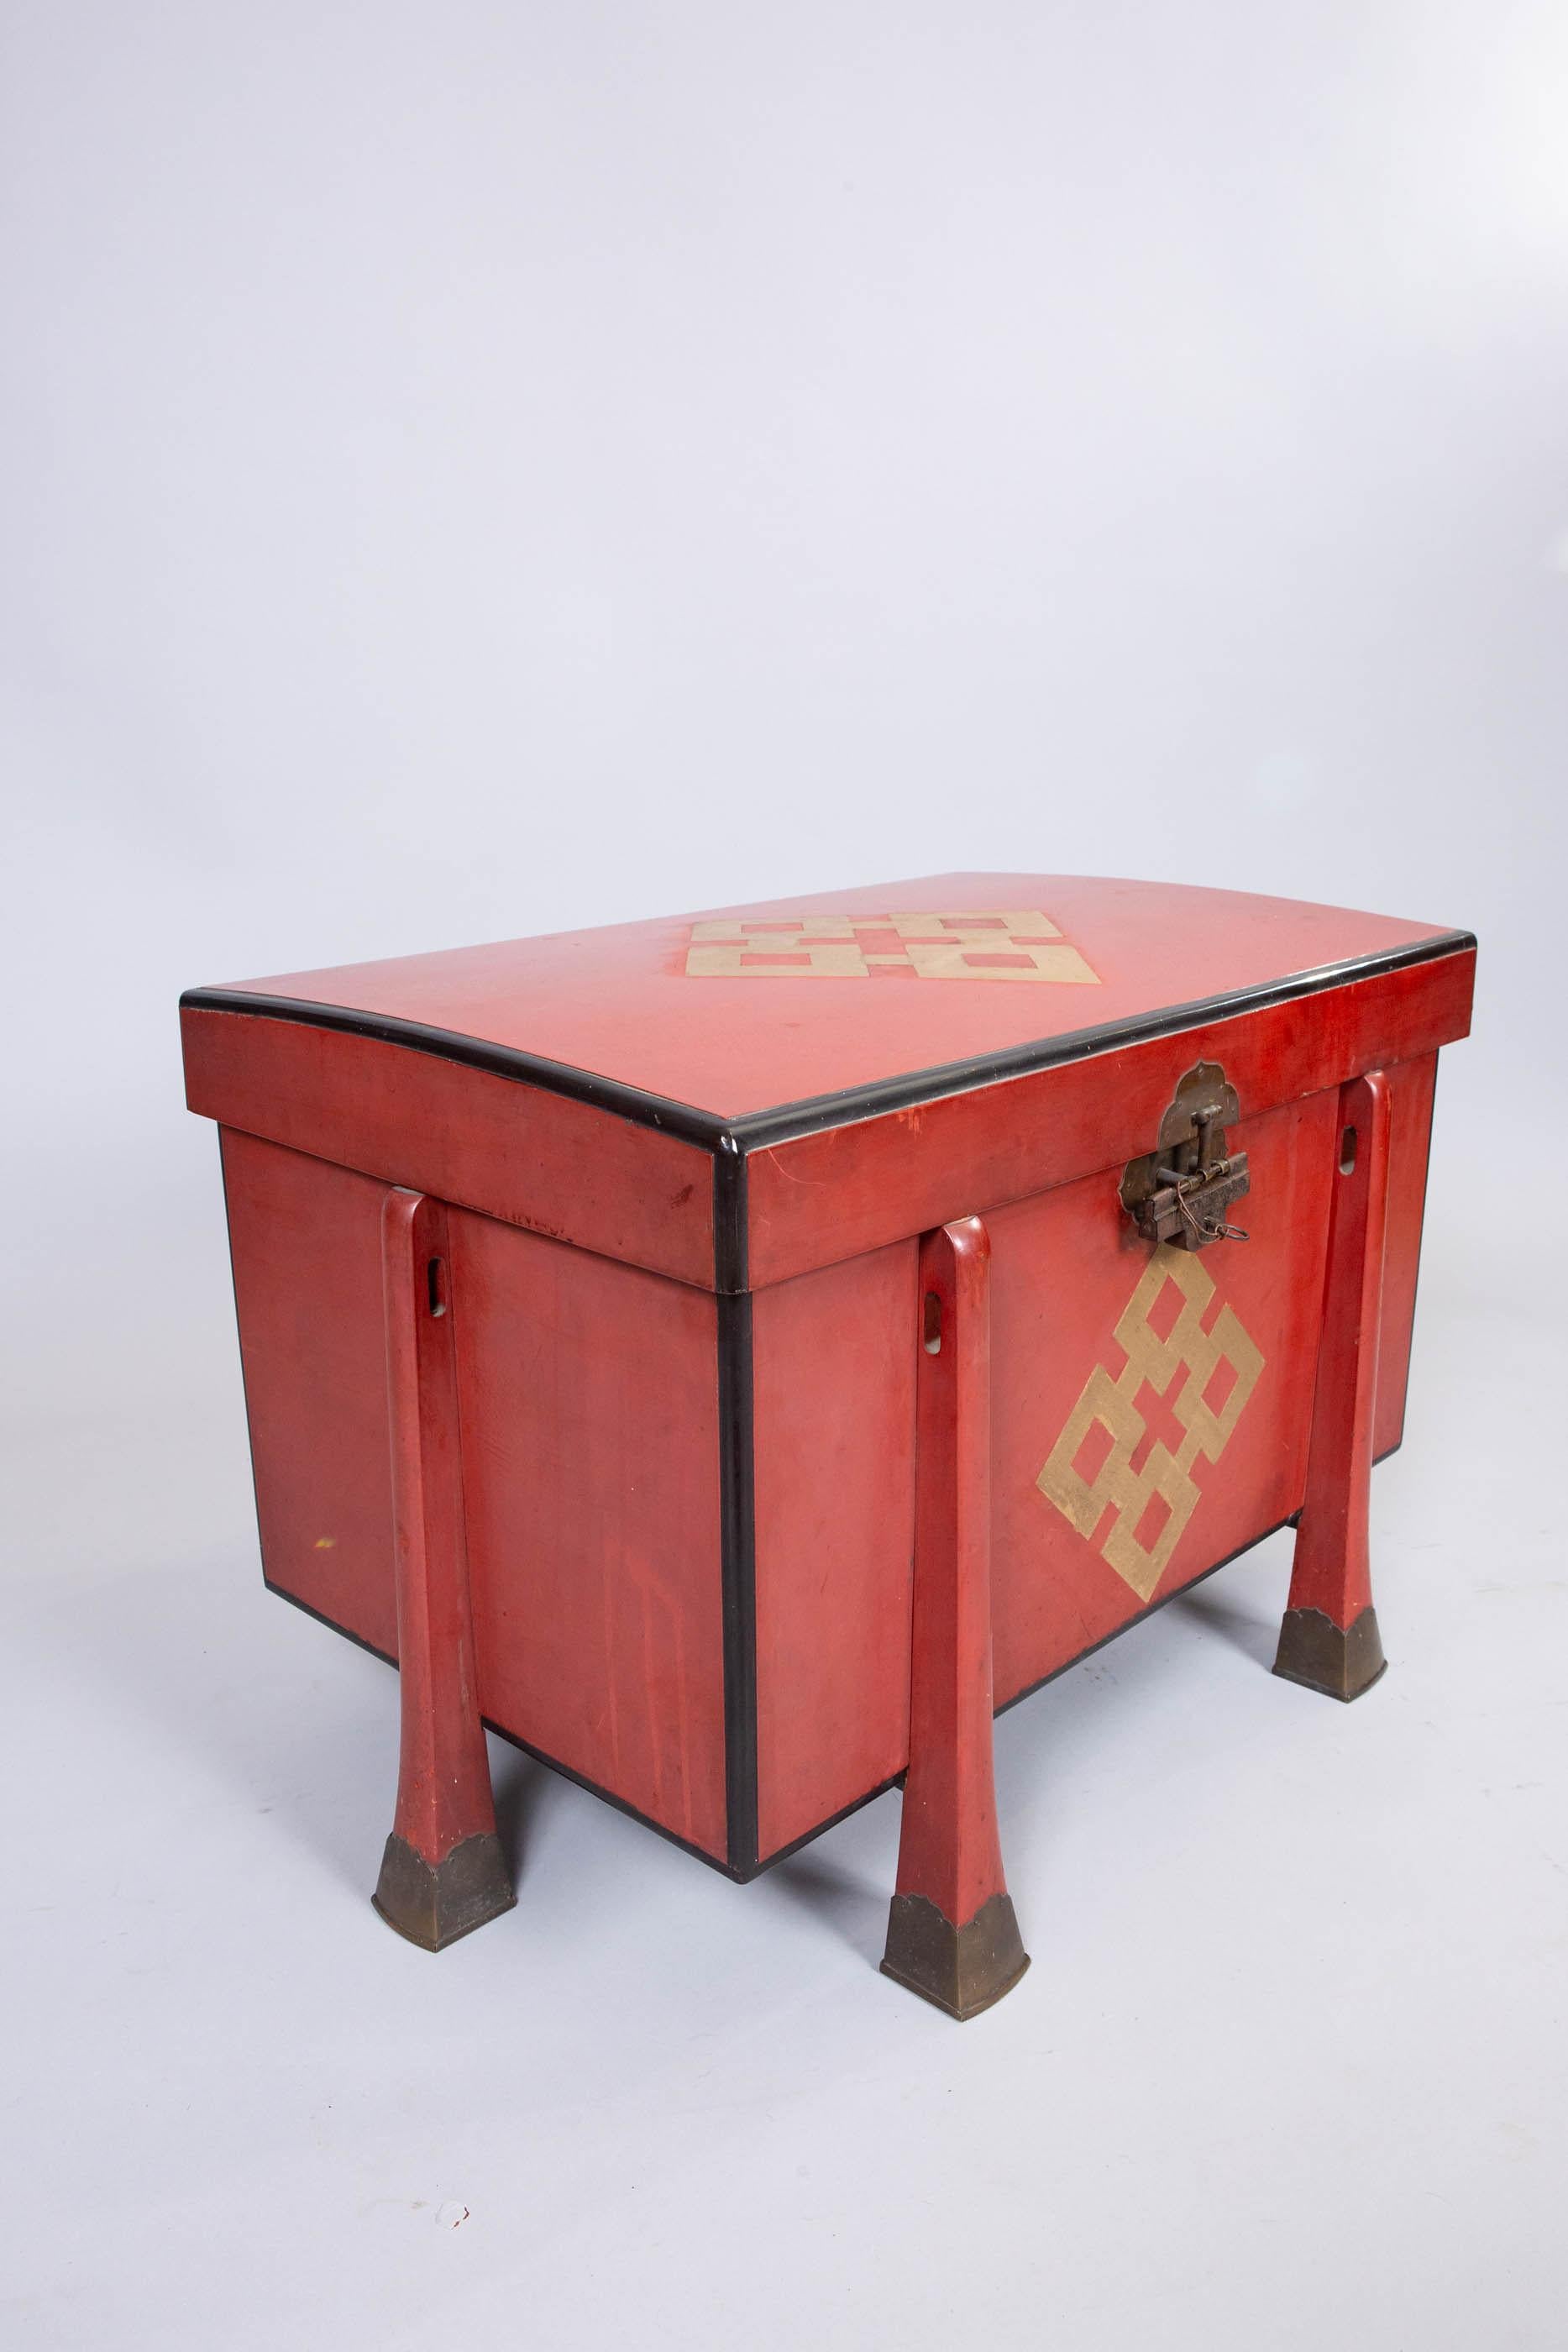 japanese red lacquer box